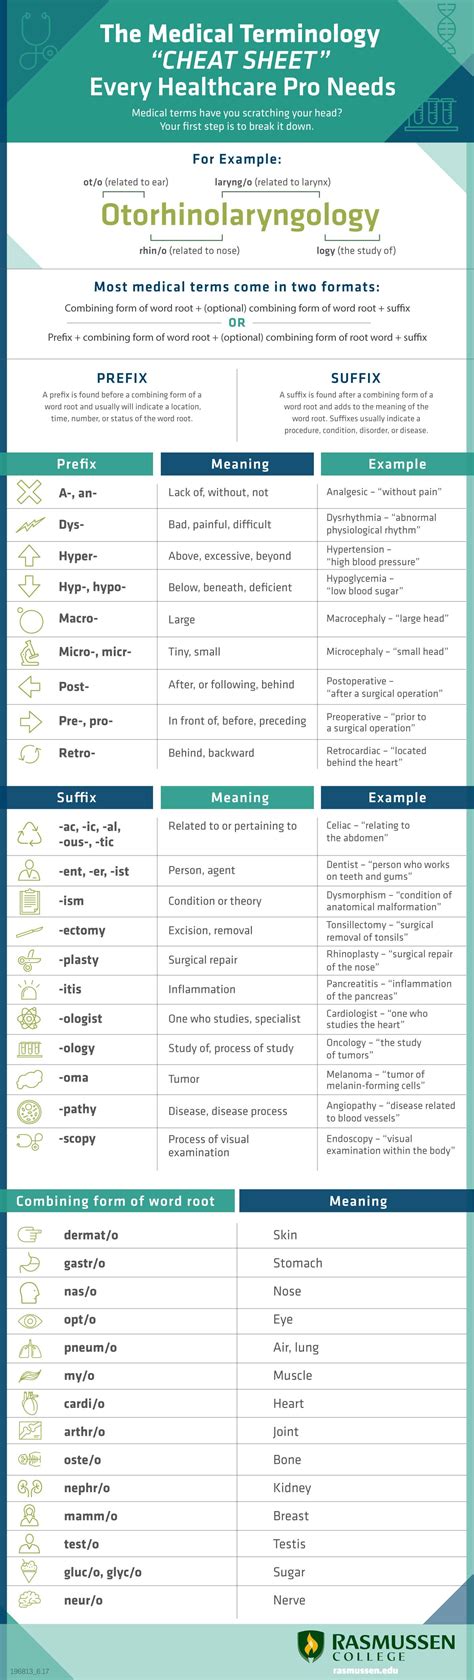 The Medical Terminology Cheat Sheet Every Healthcare Pro Needs